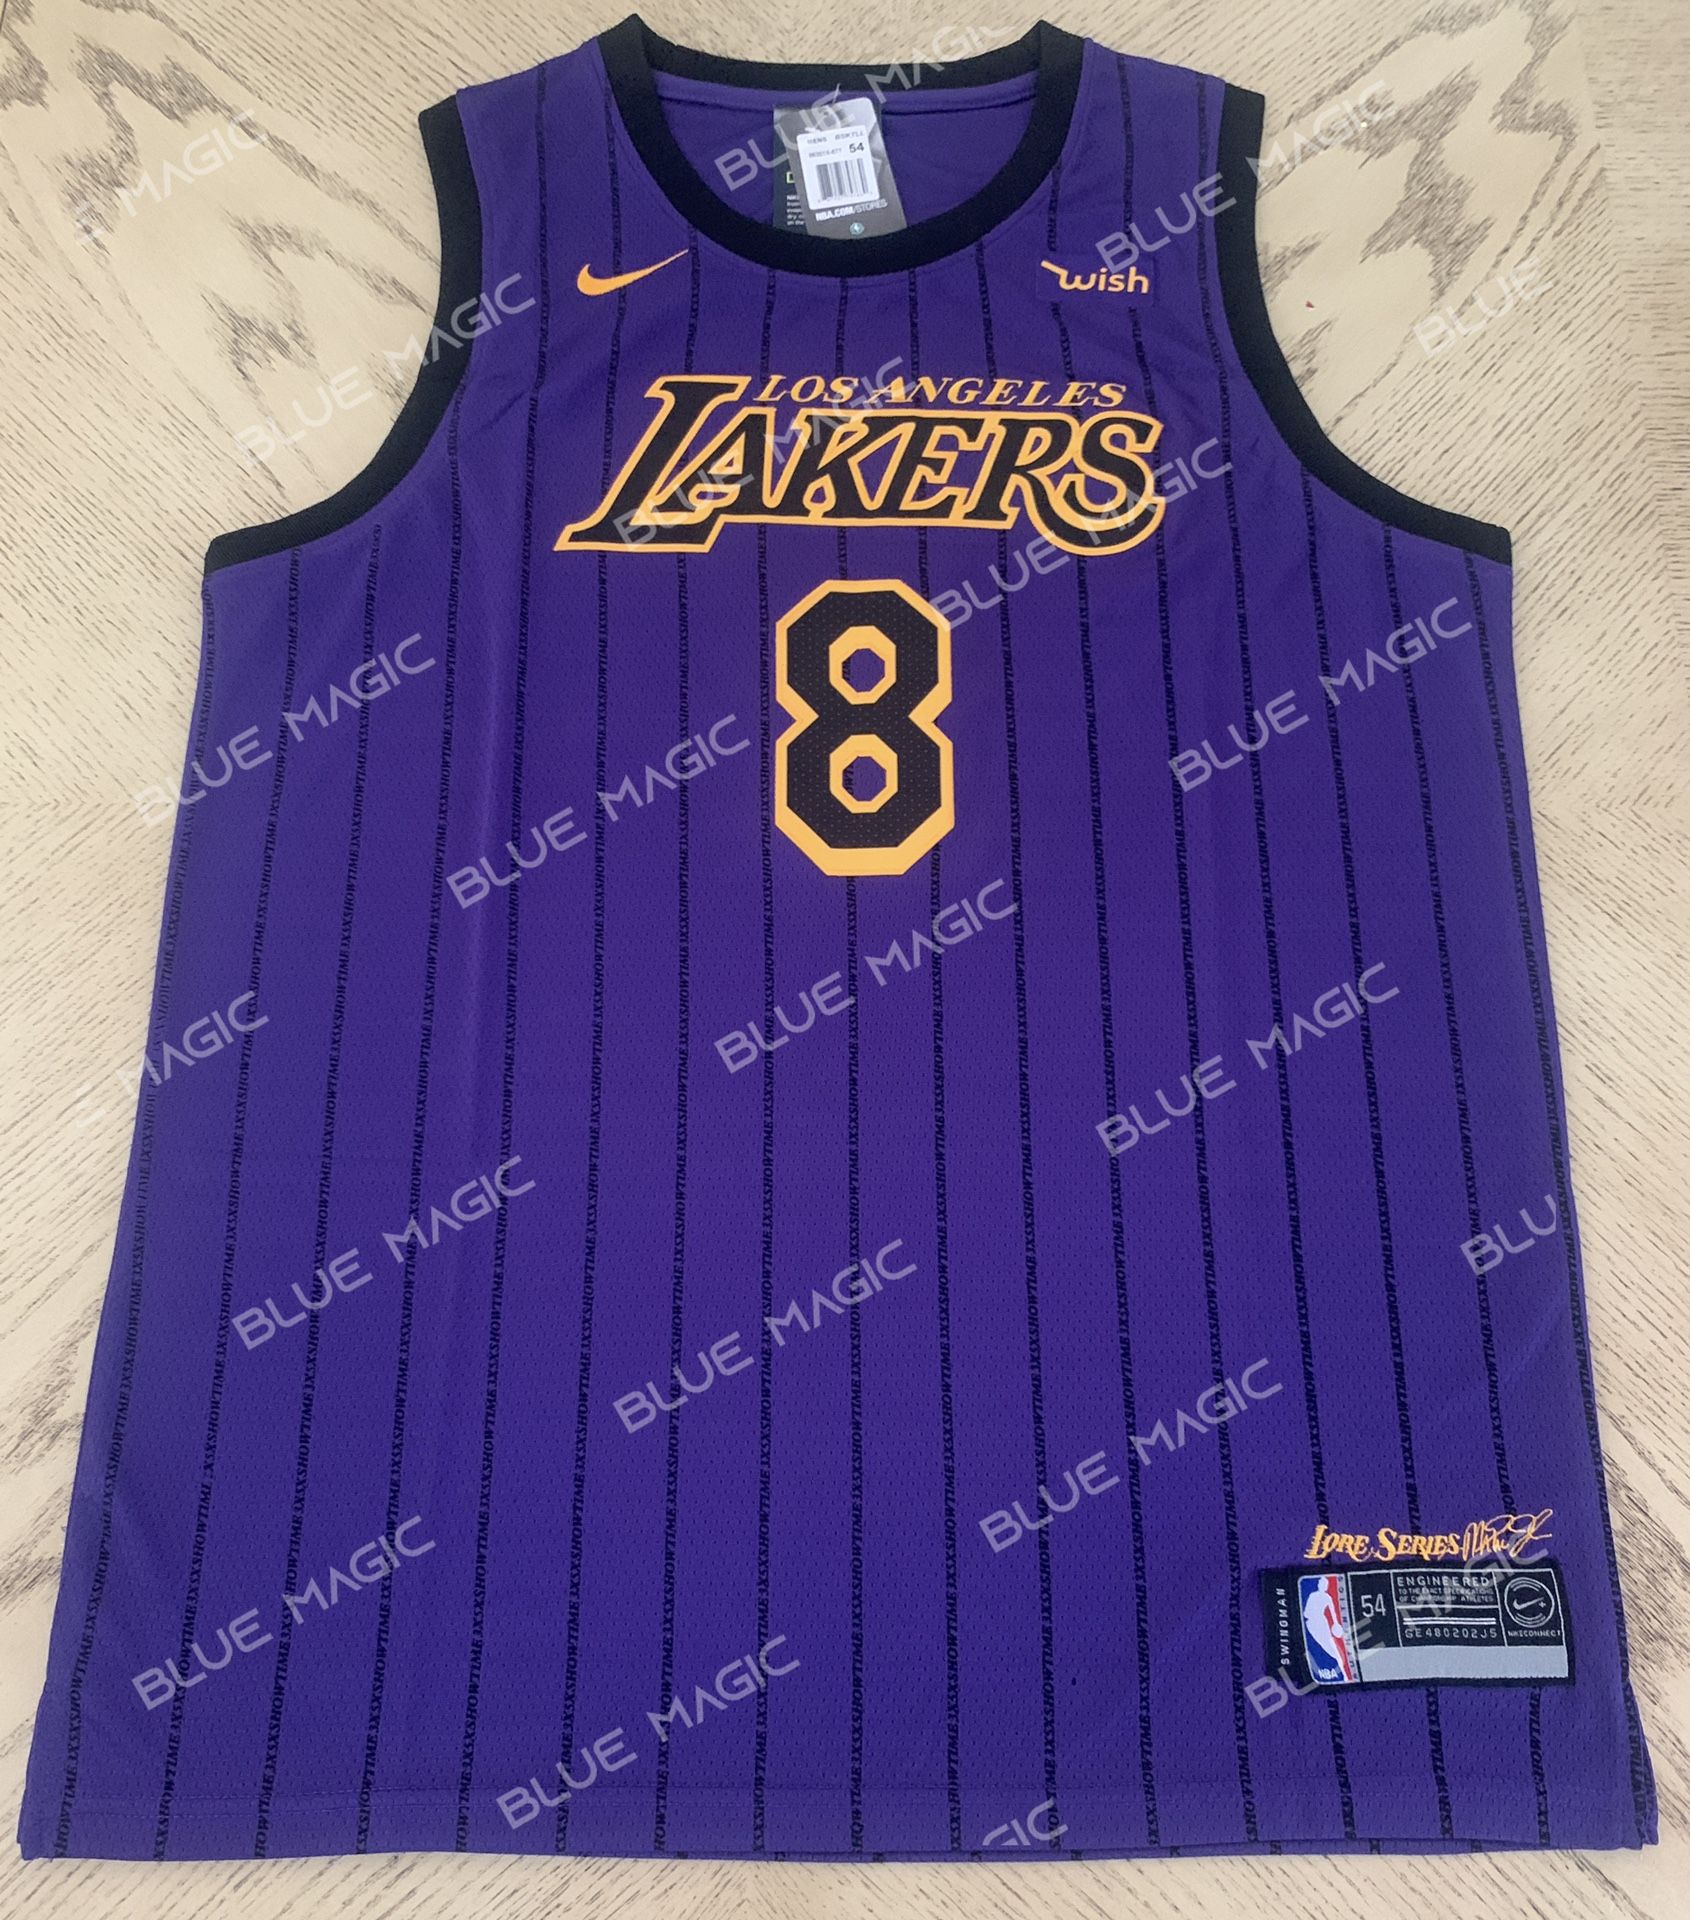 Los Angeles Dodgers Kobe Bryant #8/24 MLB Jersey for Sale in Los Angeles,  CA - OfferUp